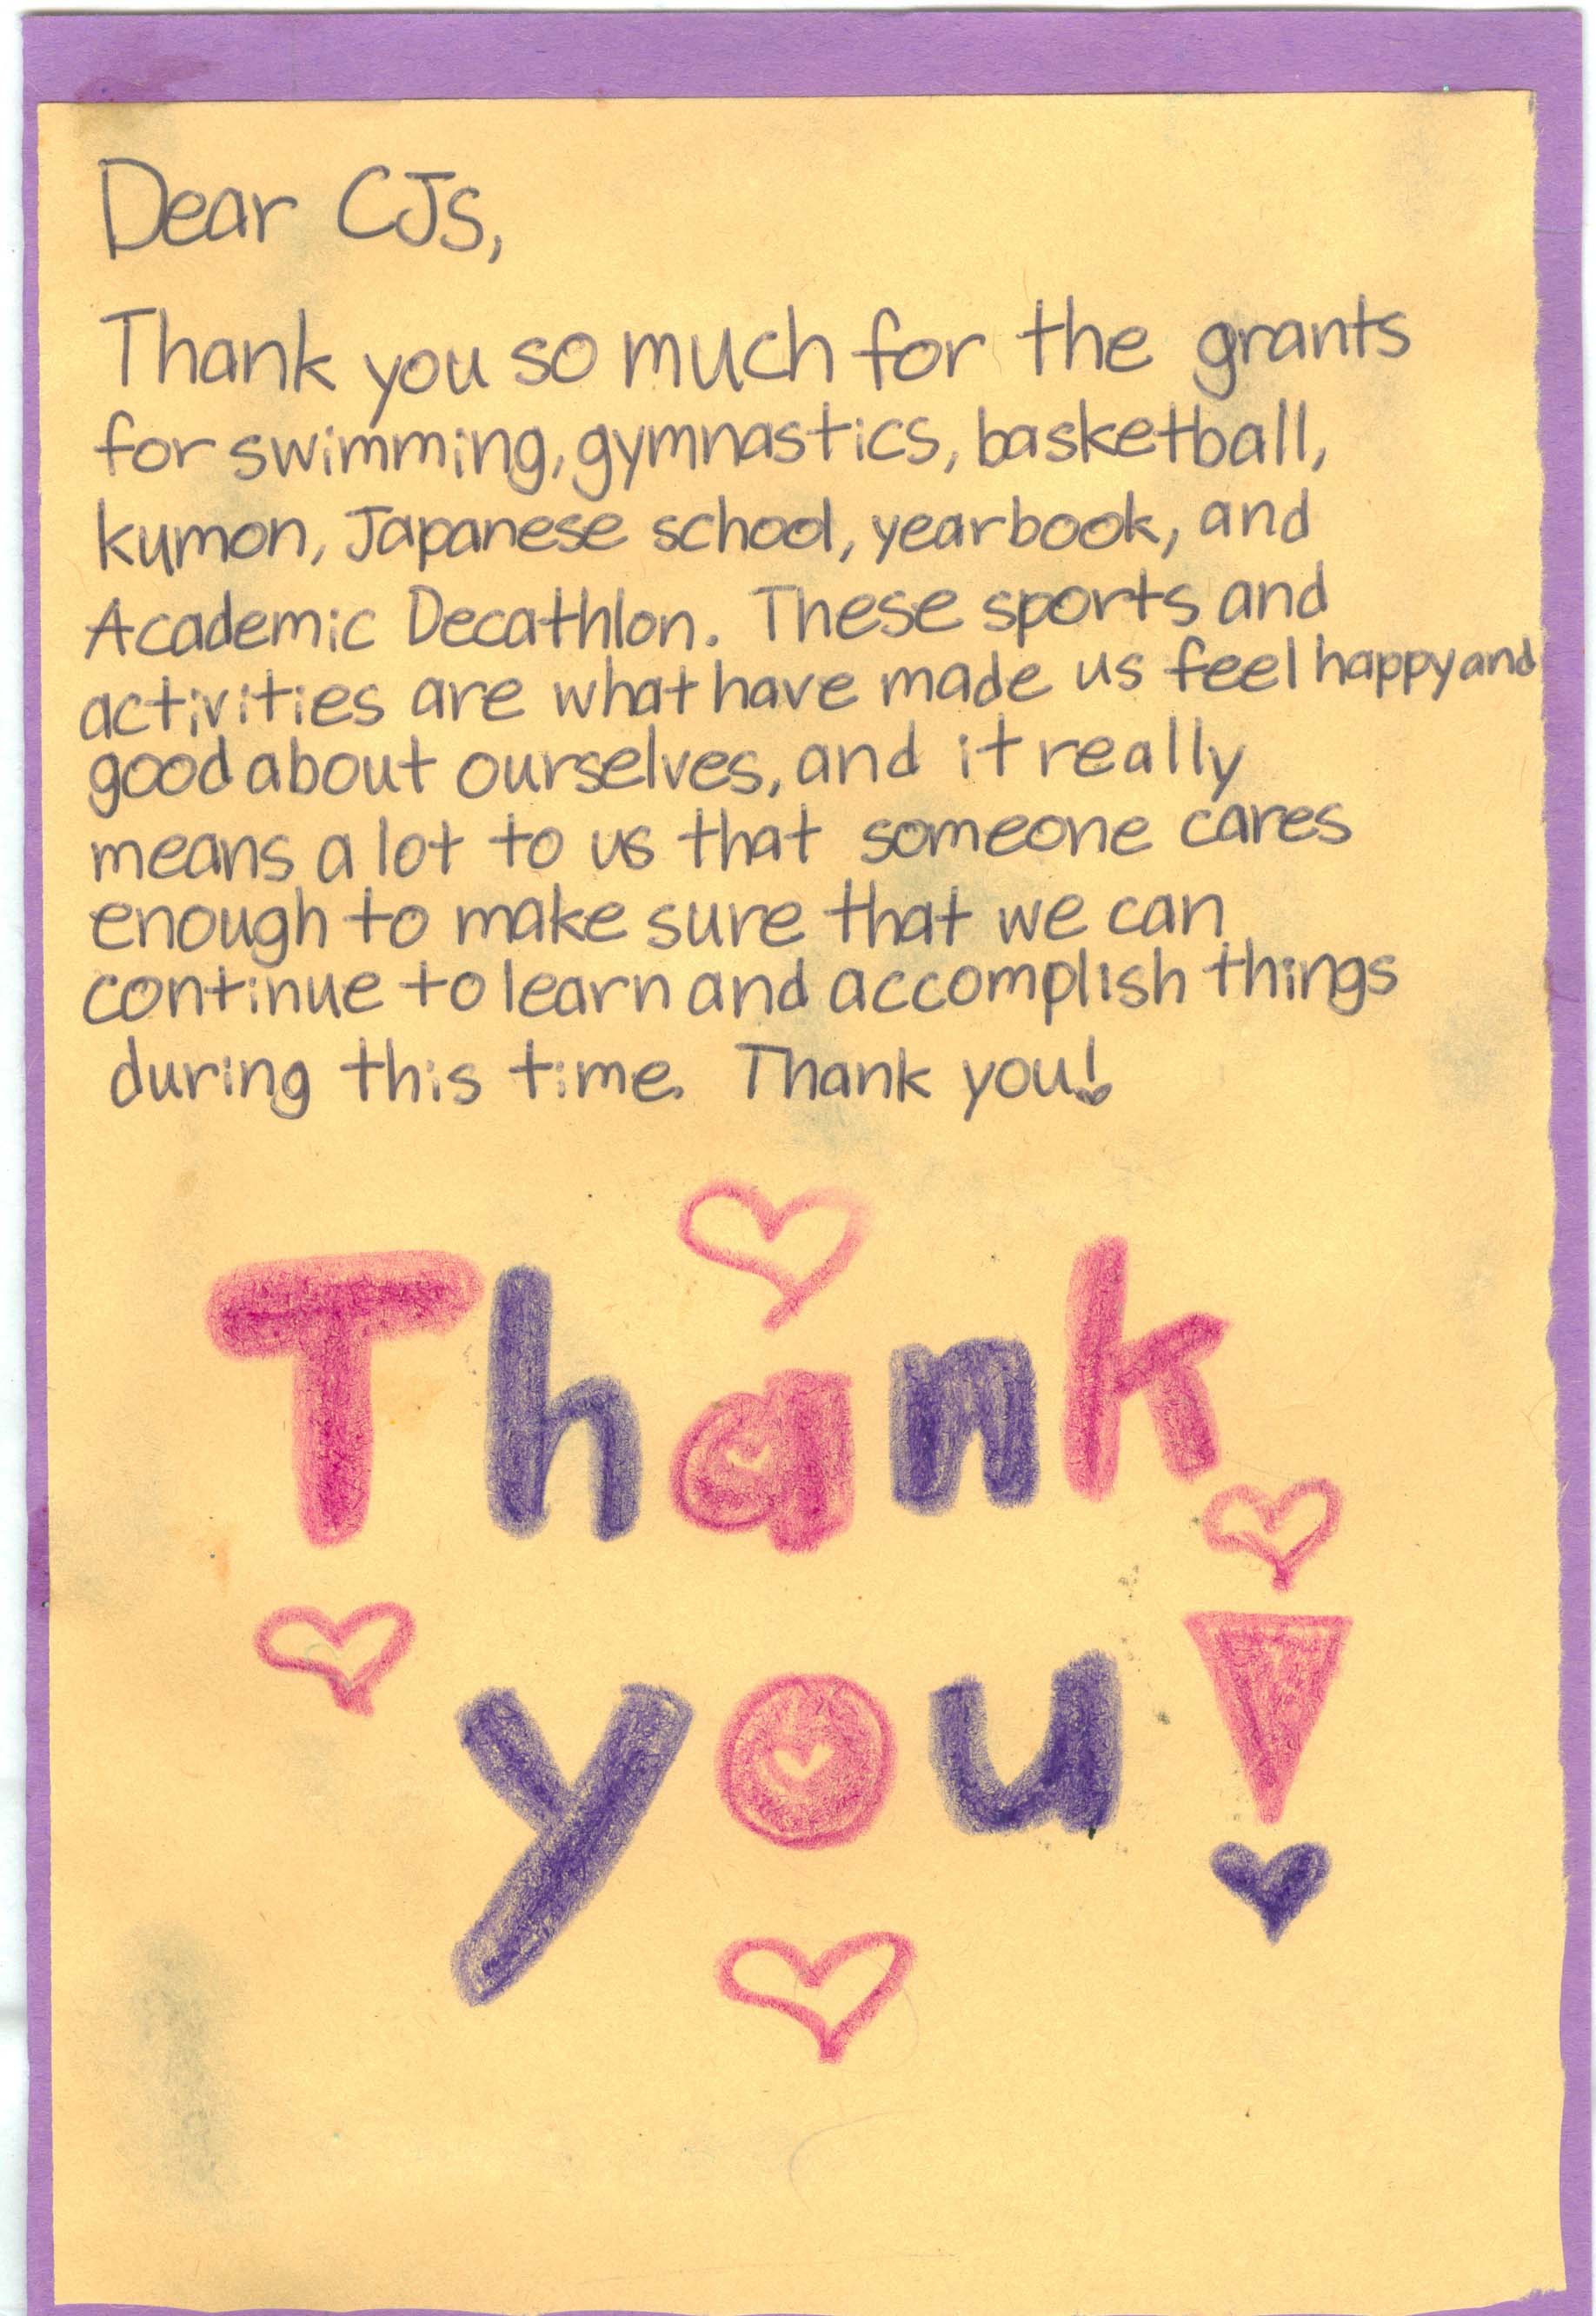 Child Thank you letter 2.